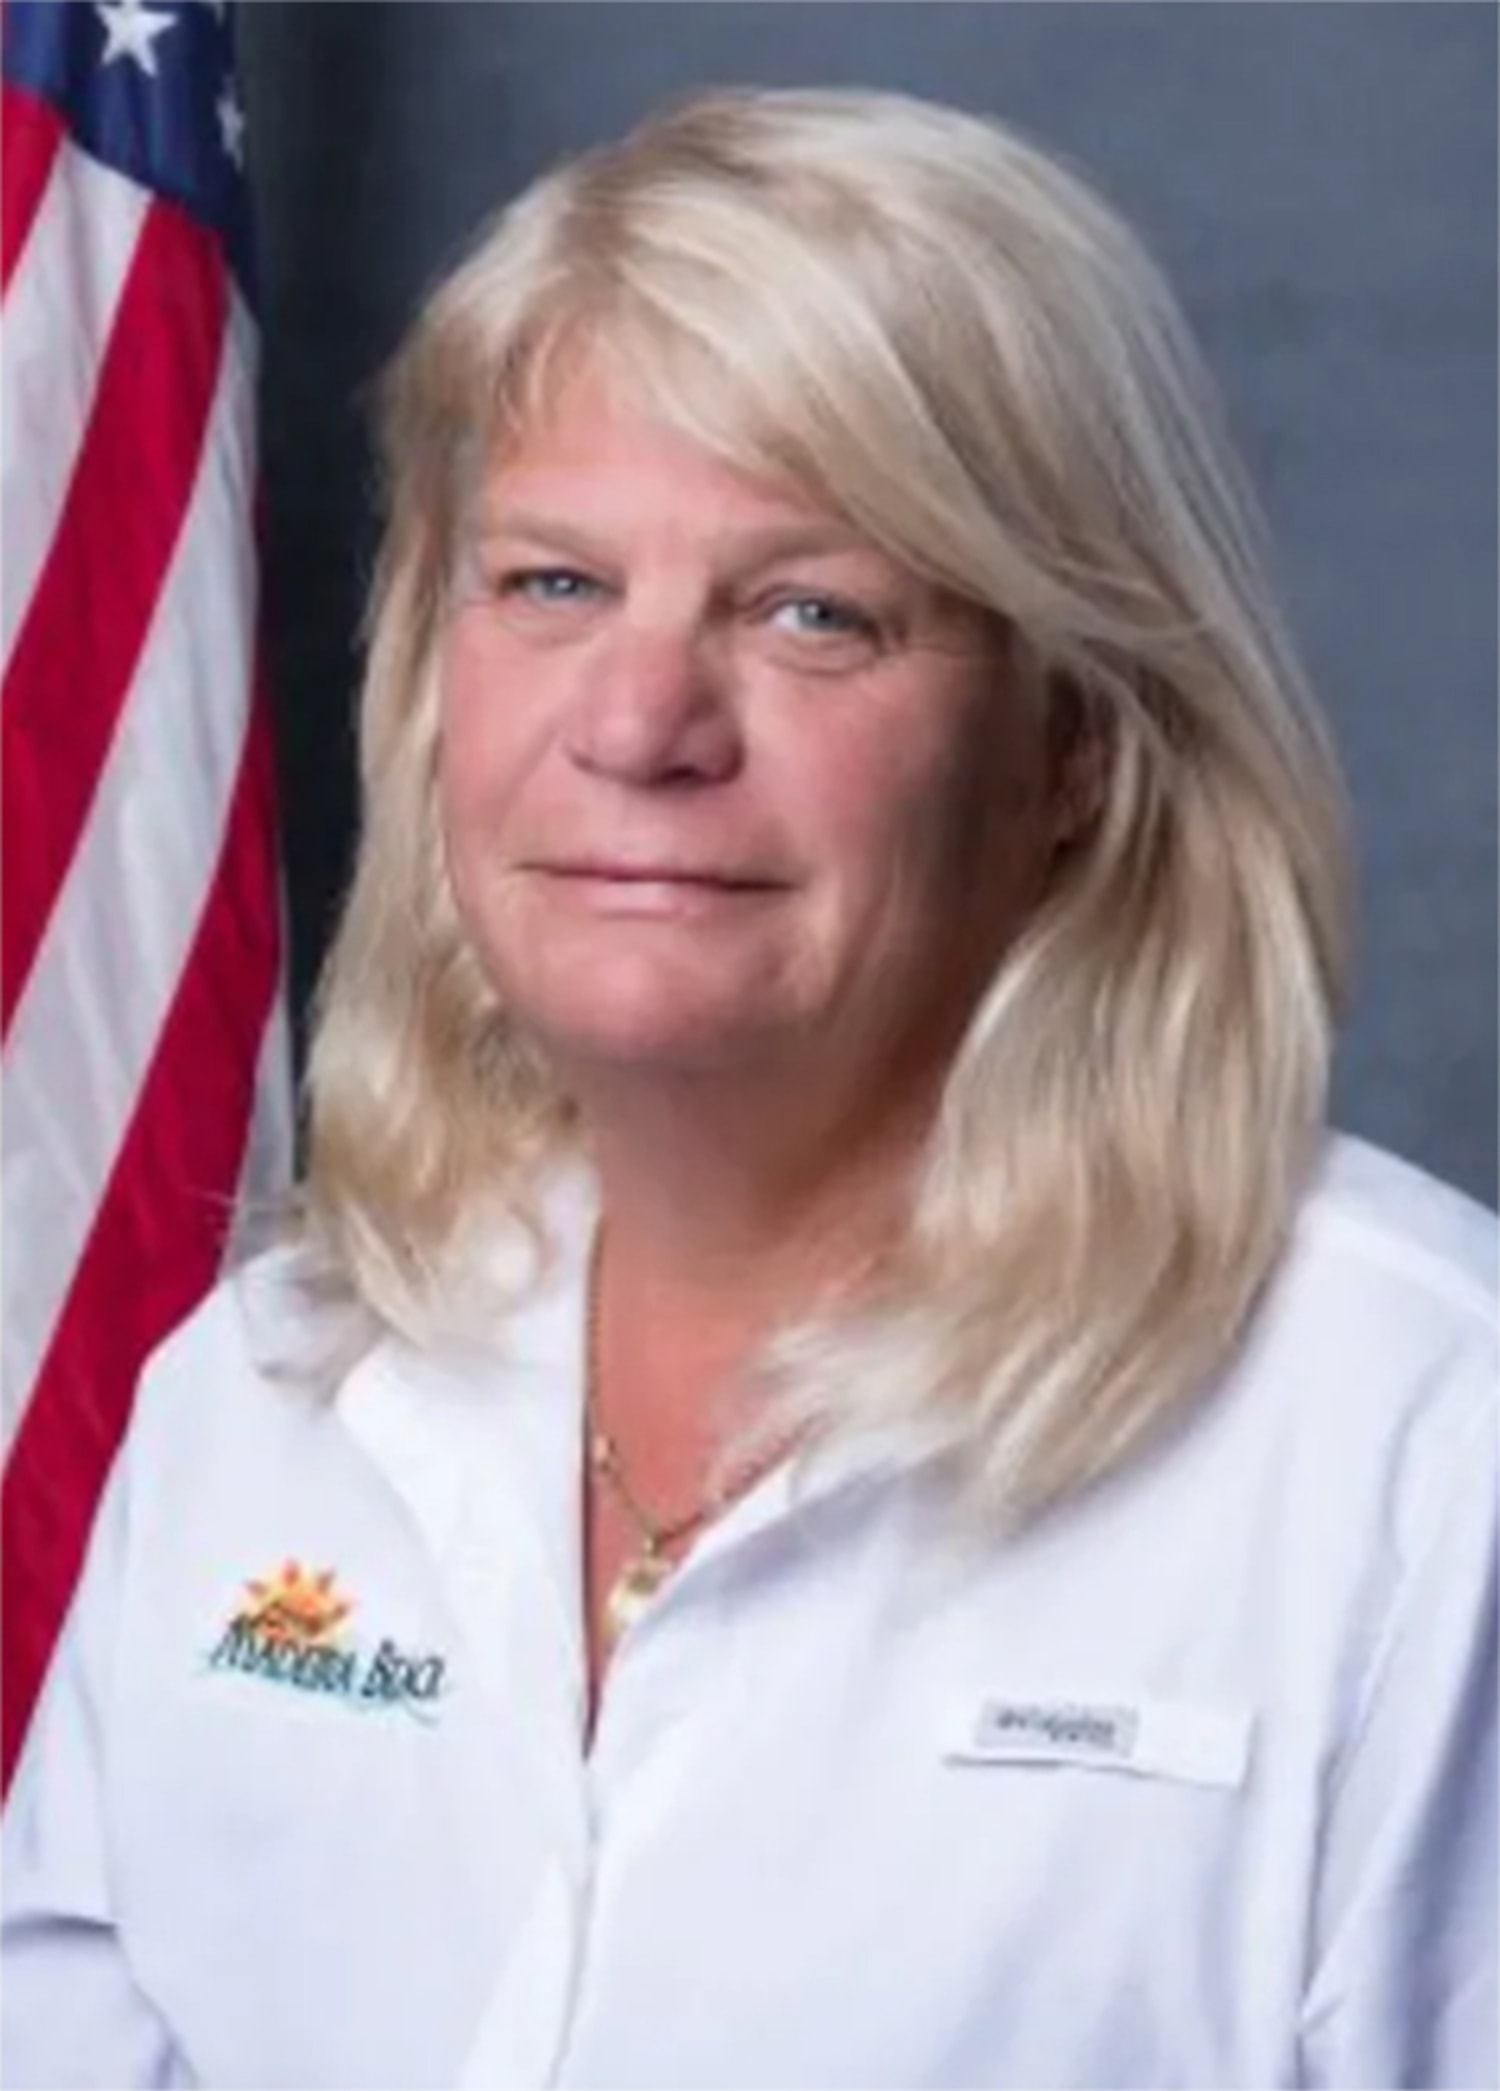 Florida city commissioner resigns following complaints she licked mens faces, groped them